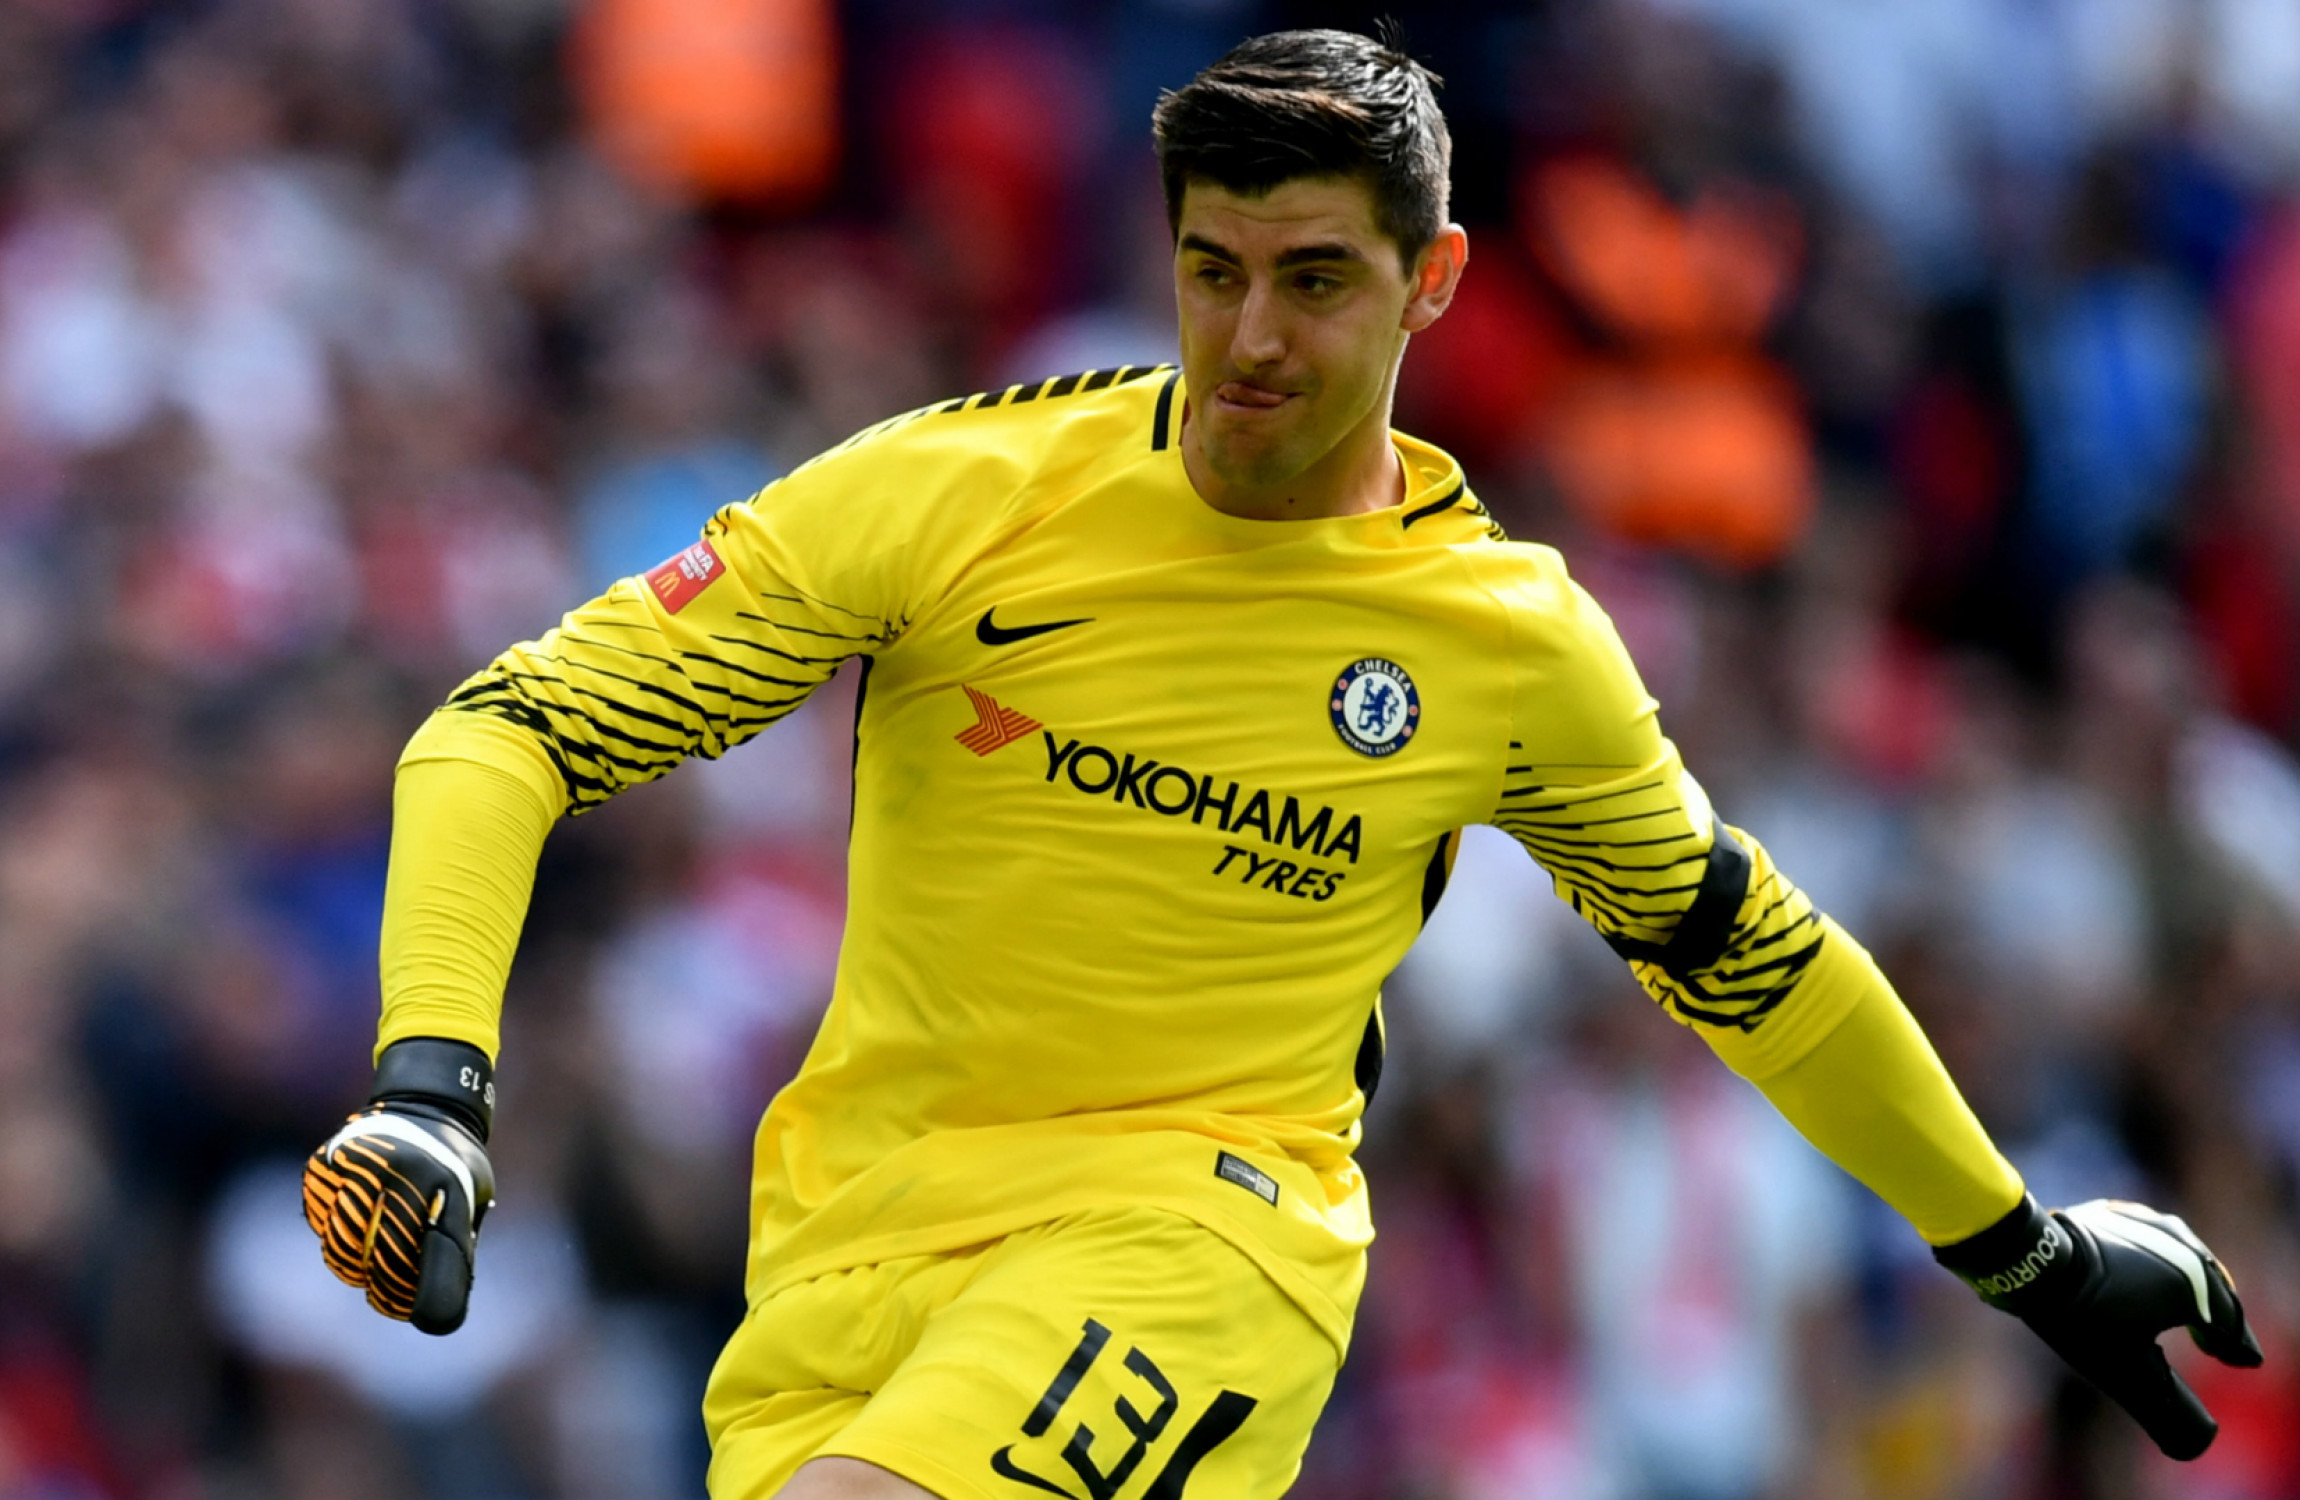 Real Madrid Goalie / Former Chelsea goalkeeper Courtois says winning with Real ... - Get the ...